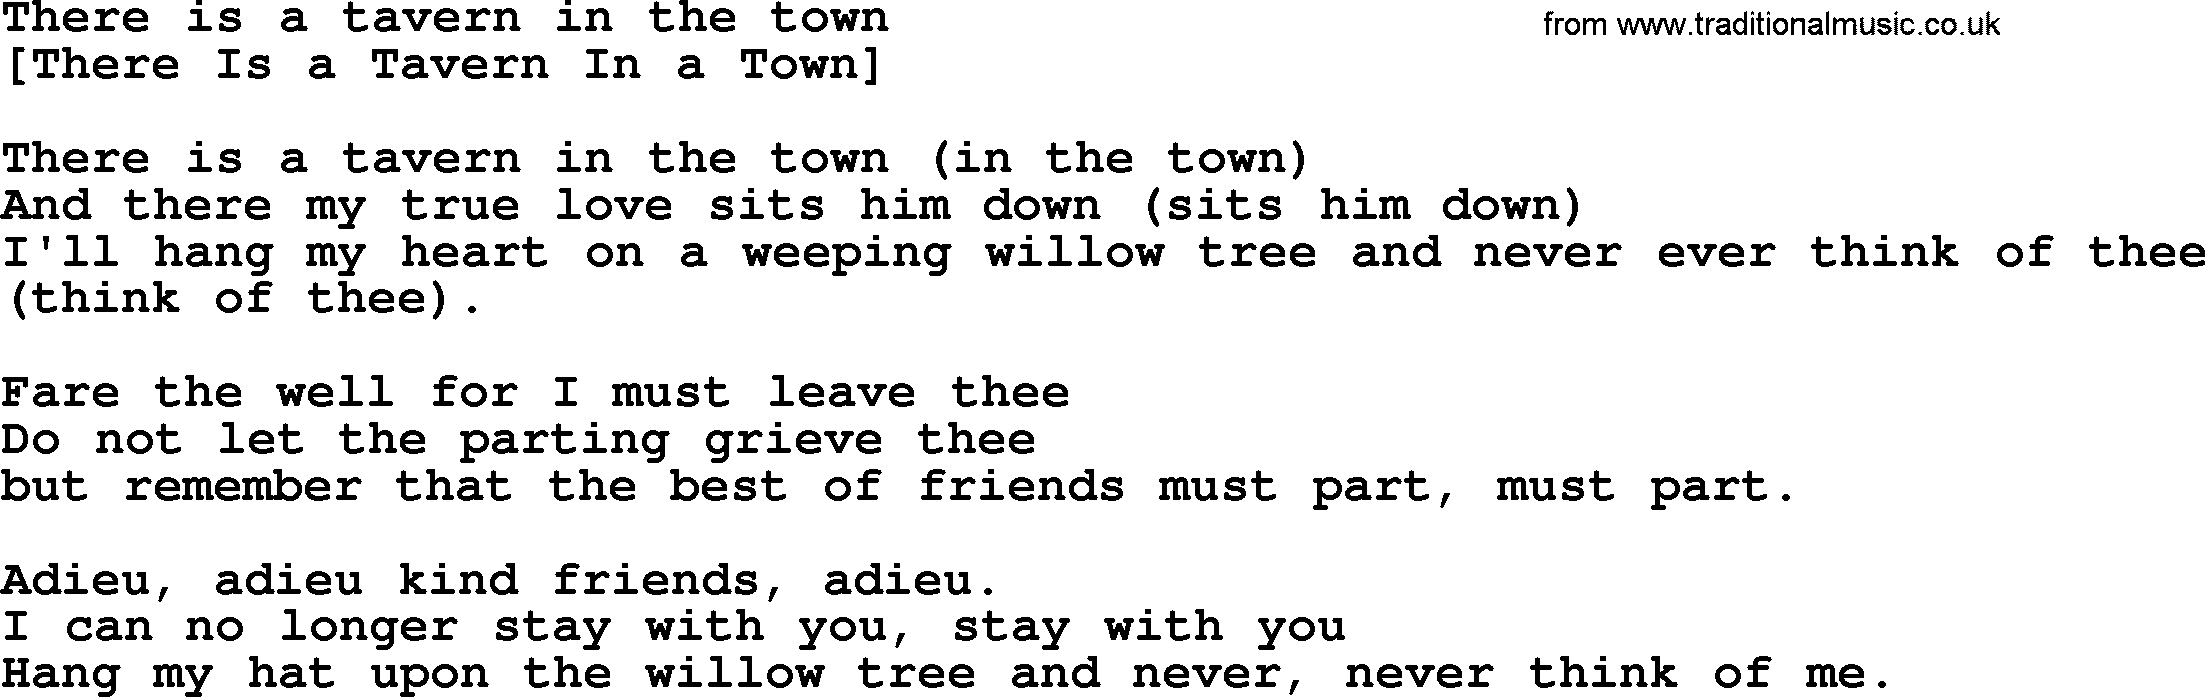 Old American Song: There Is A Tavern In The Town, lyrics